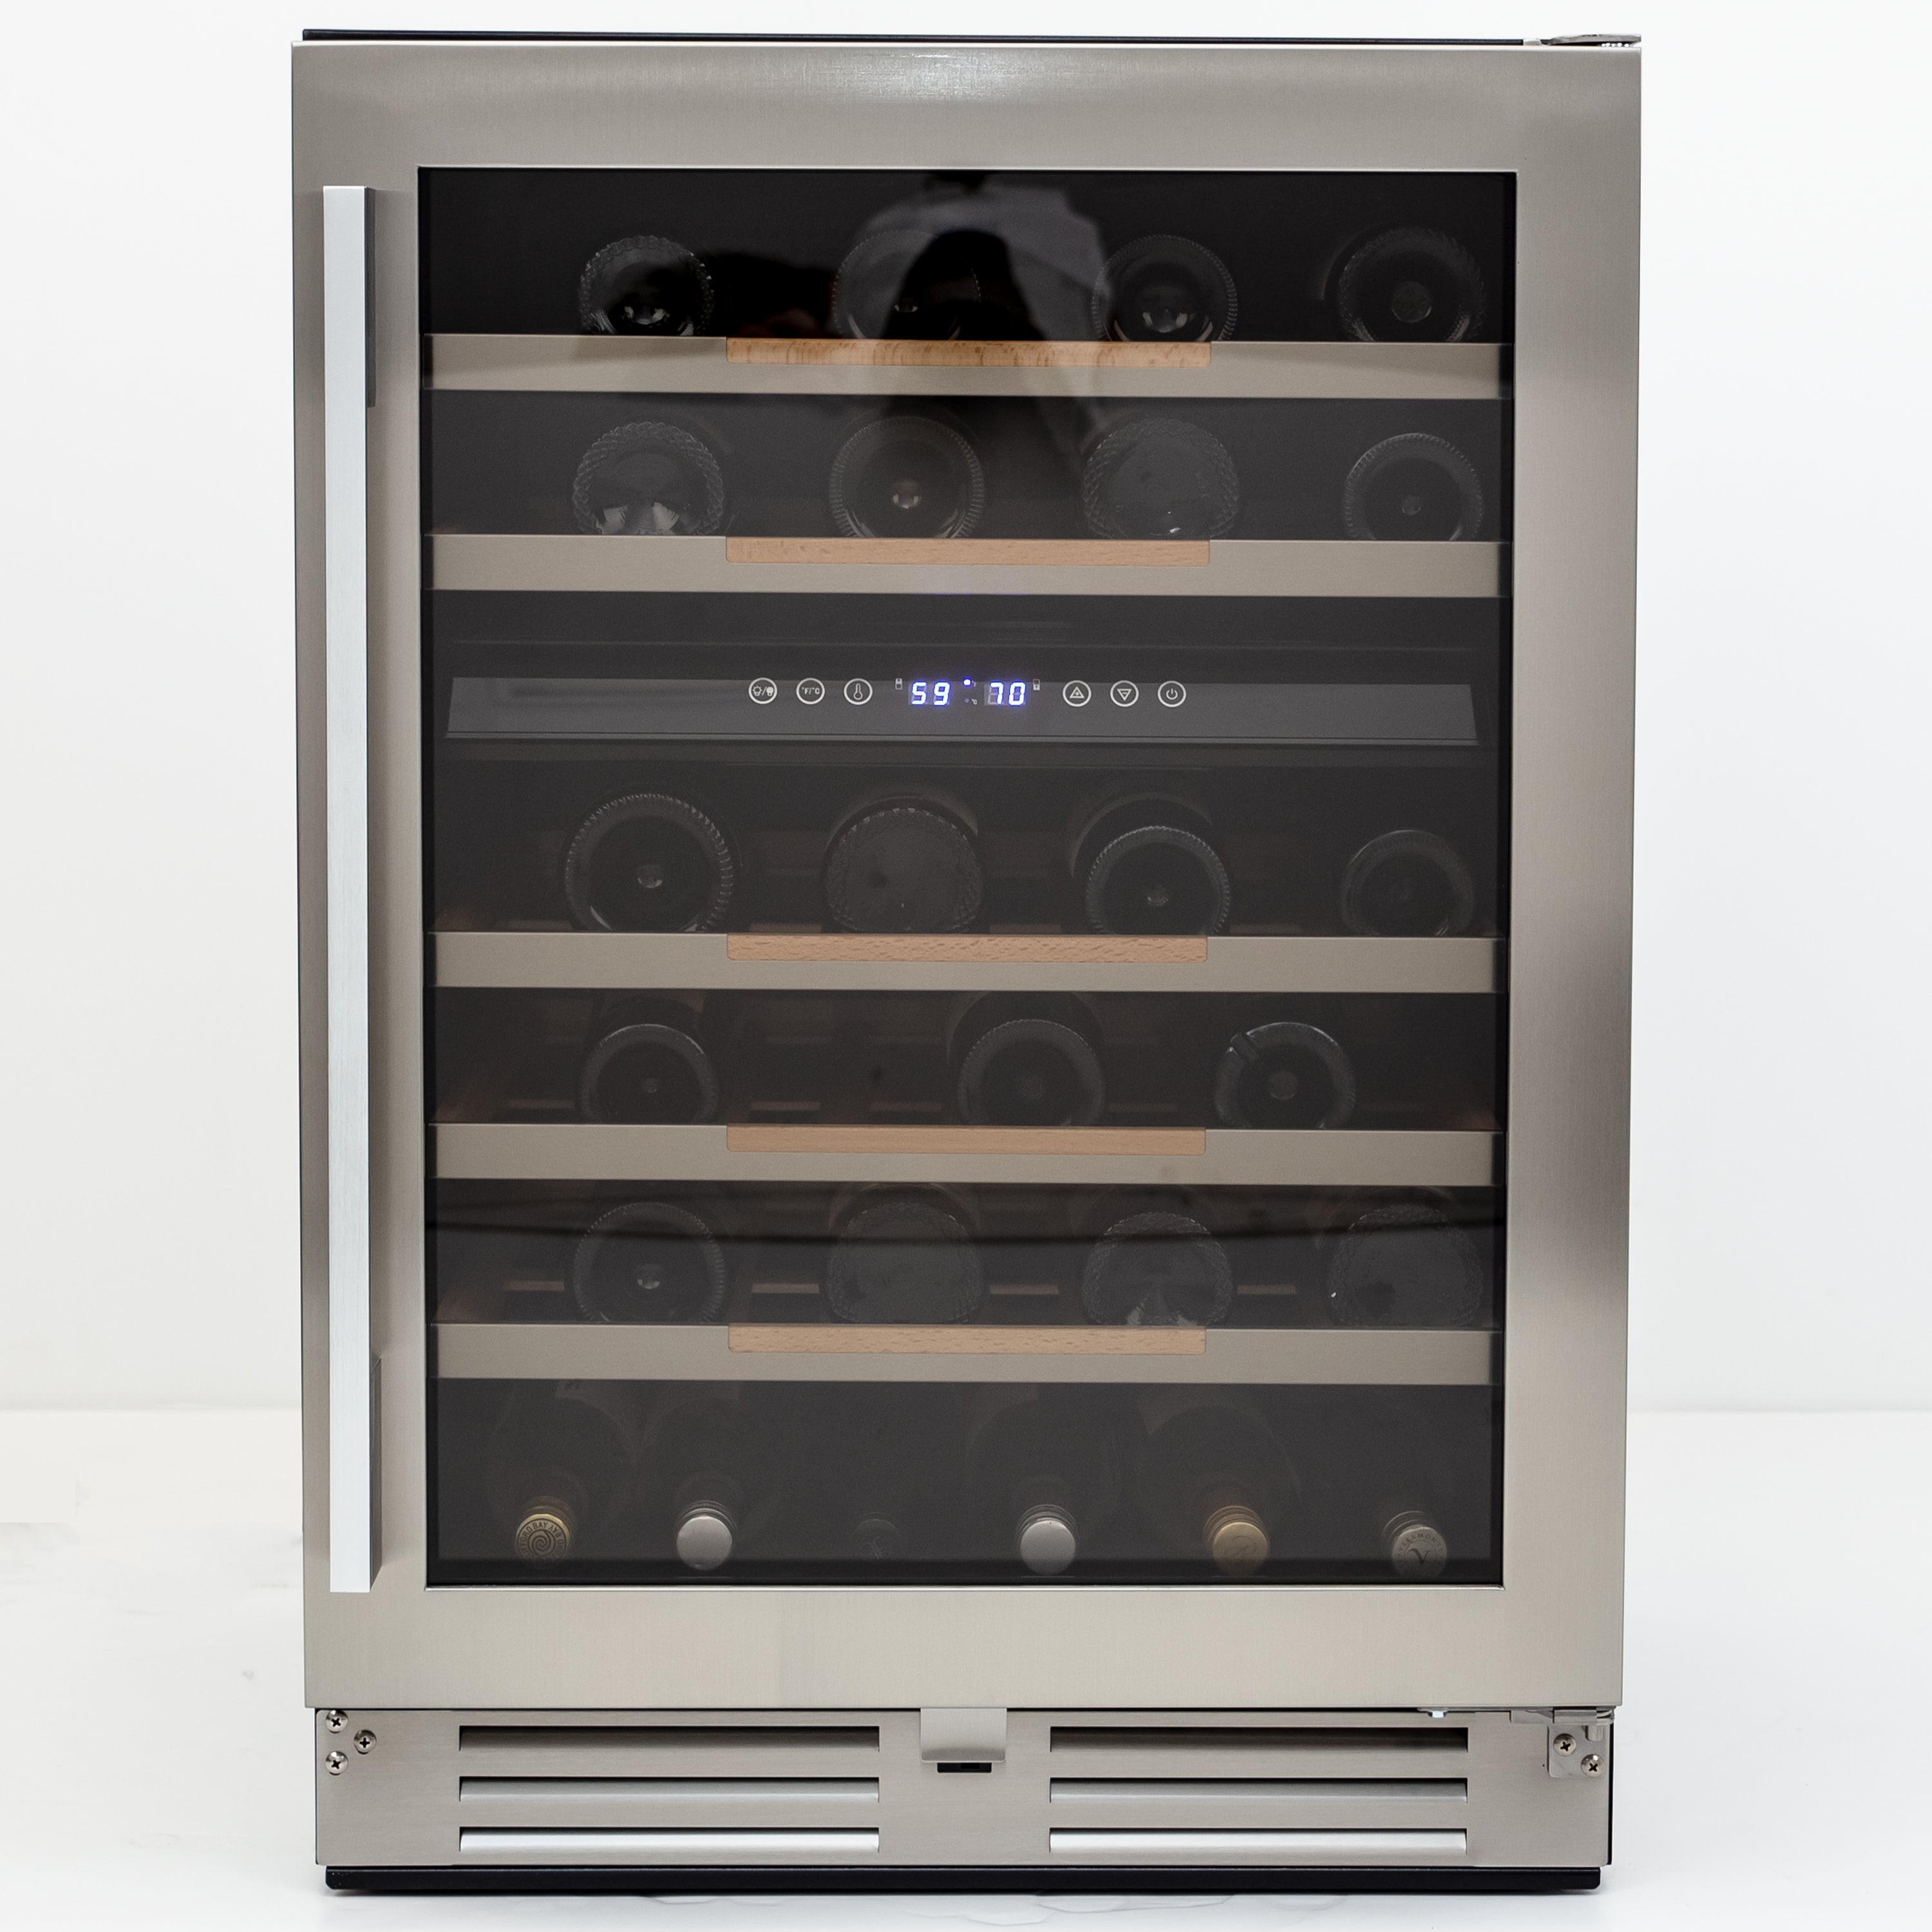 Avanti - WCDE46R3S, Avanti ELITE Series Dual-Zone Wine Cooler, 46 Bottle Capacity, in Stainless Steel with Wood Accent Shelving